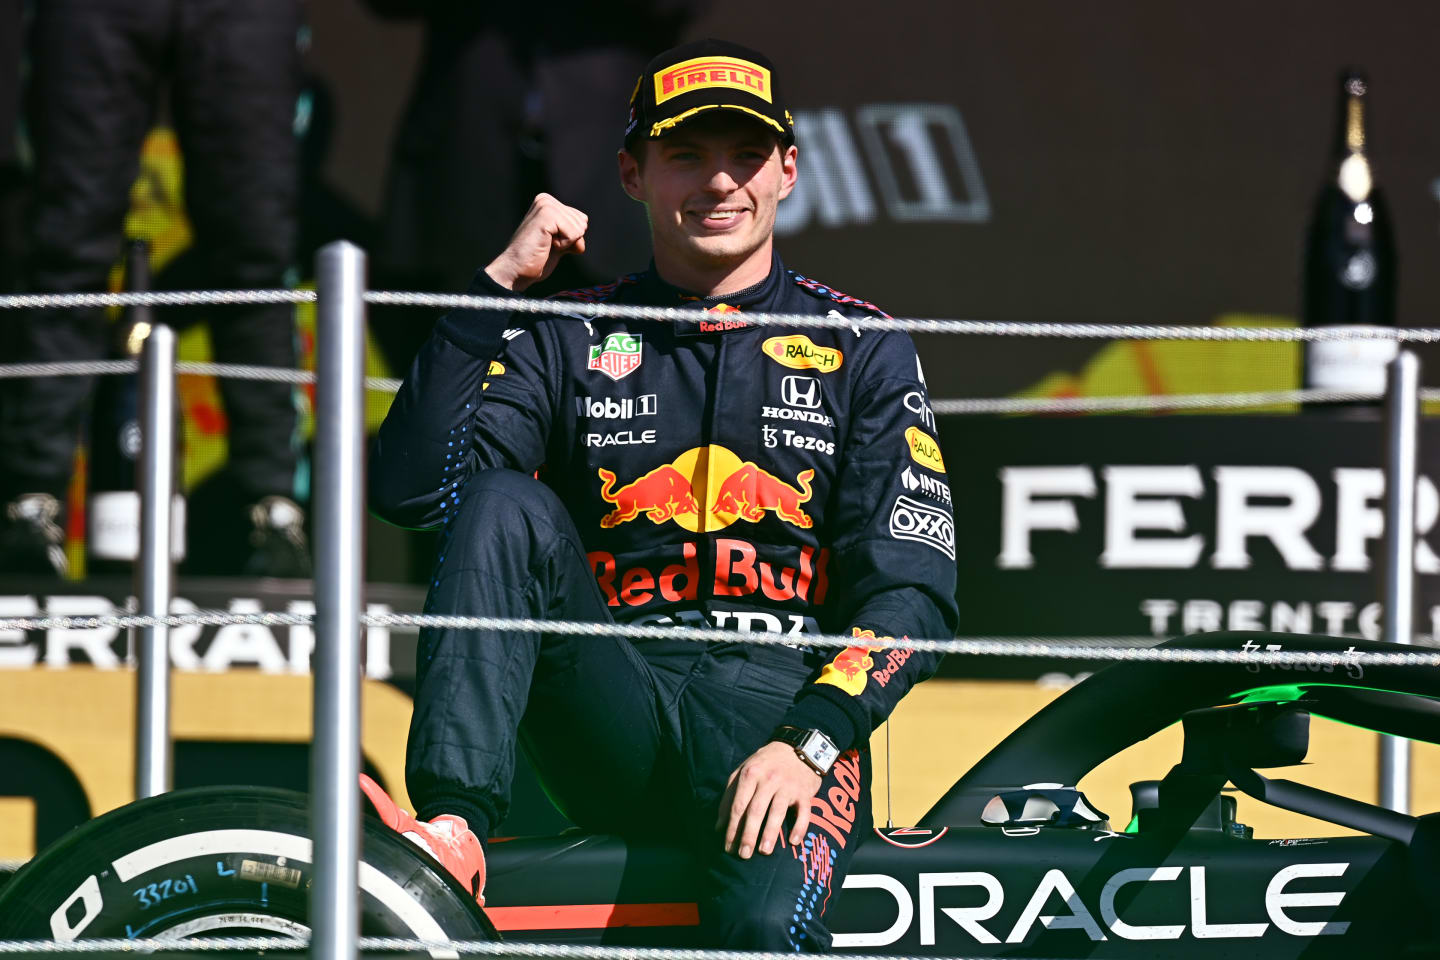 MEXICO CITY, MEXICO - NOVEMBER 07: Race winner Max Verstappen of Netherlands and Red Bull Racing celebrates on the podium during the F1 Grand Prix of Mexico at Autodromo Hermanos Rodriguez on November 07, 2021 in Mexico City, Mexico. (Photo by Clive Mason/Getty Images)